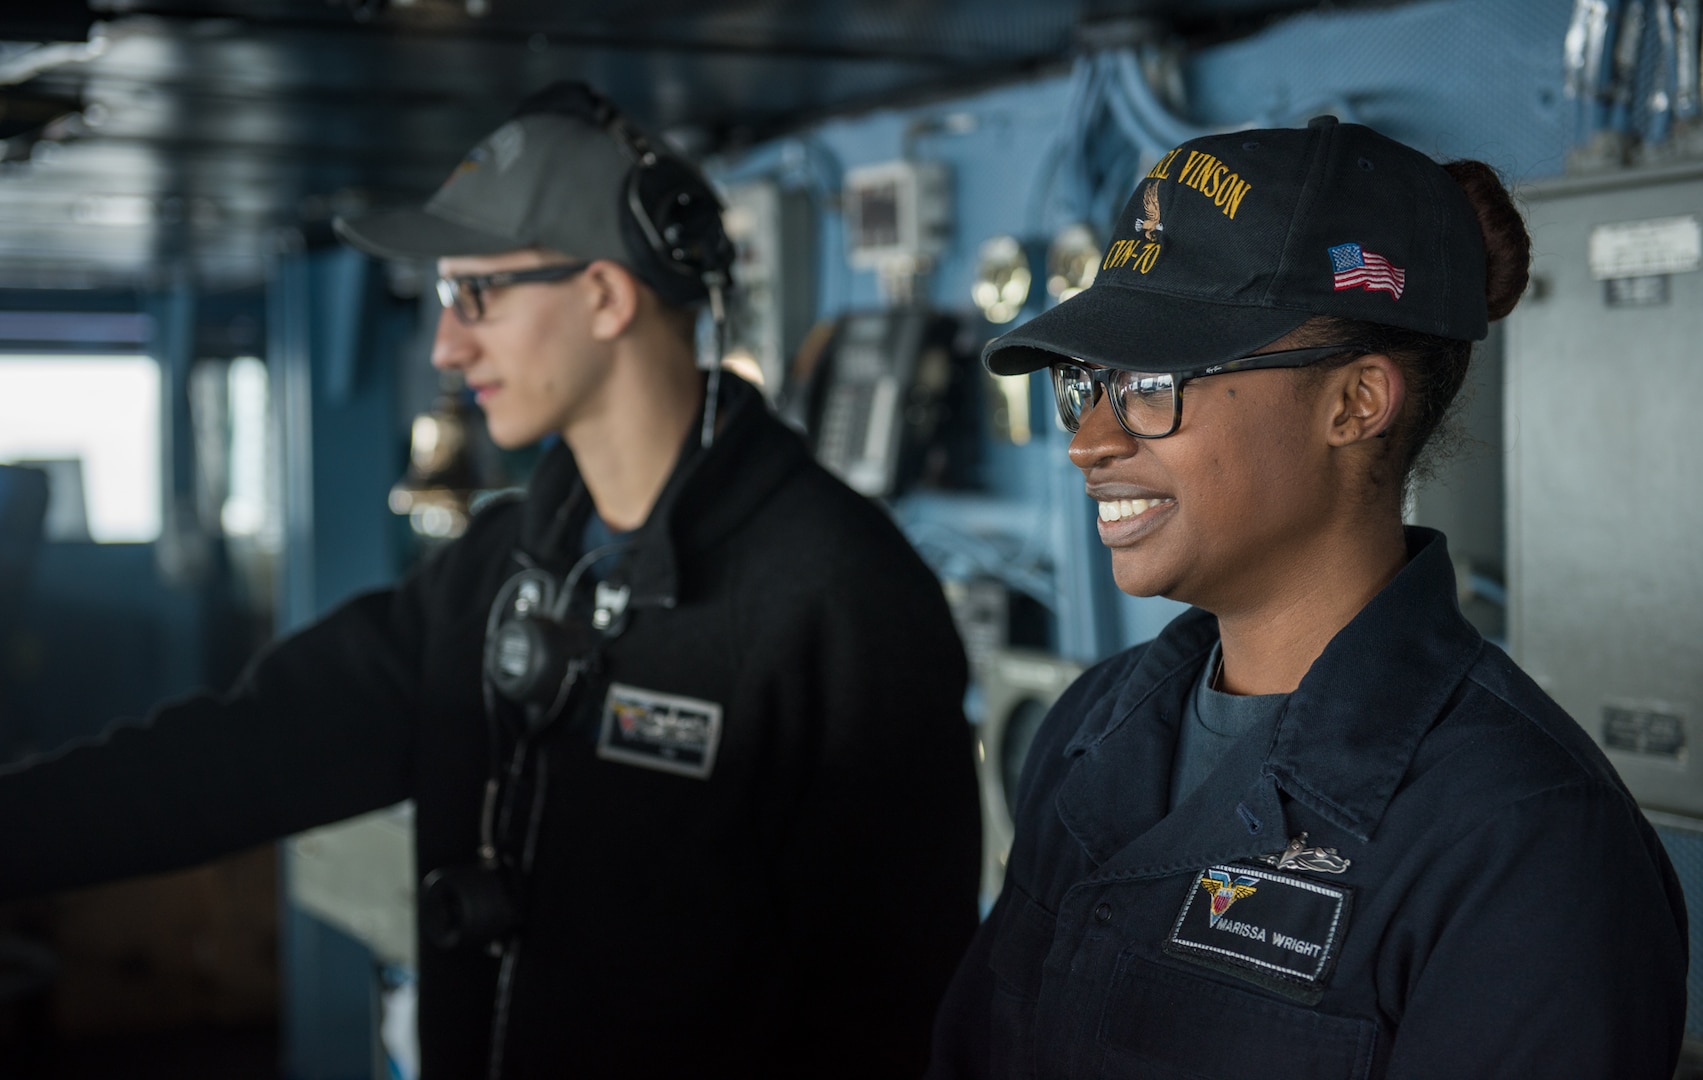 Lt. Jillianne Planeta stands the officer of the deck watch on the bridge of the Nimitz-class aircraft carrier USS Carl Vinson (CVN 70) in the Pacific Ocean. The U.S. Navy has patrolled the Indo-Asia-Pacific routinely for more than 70 years promoting regional peace and security.